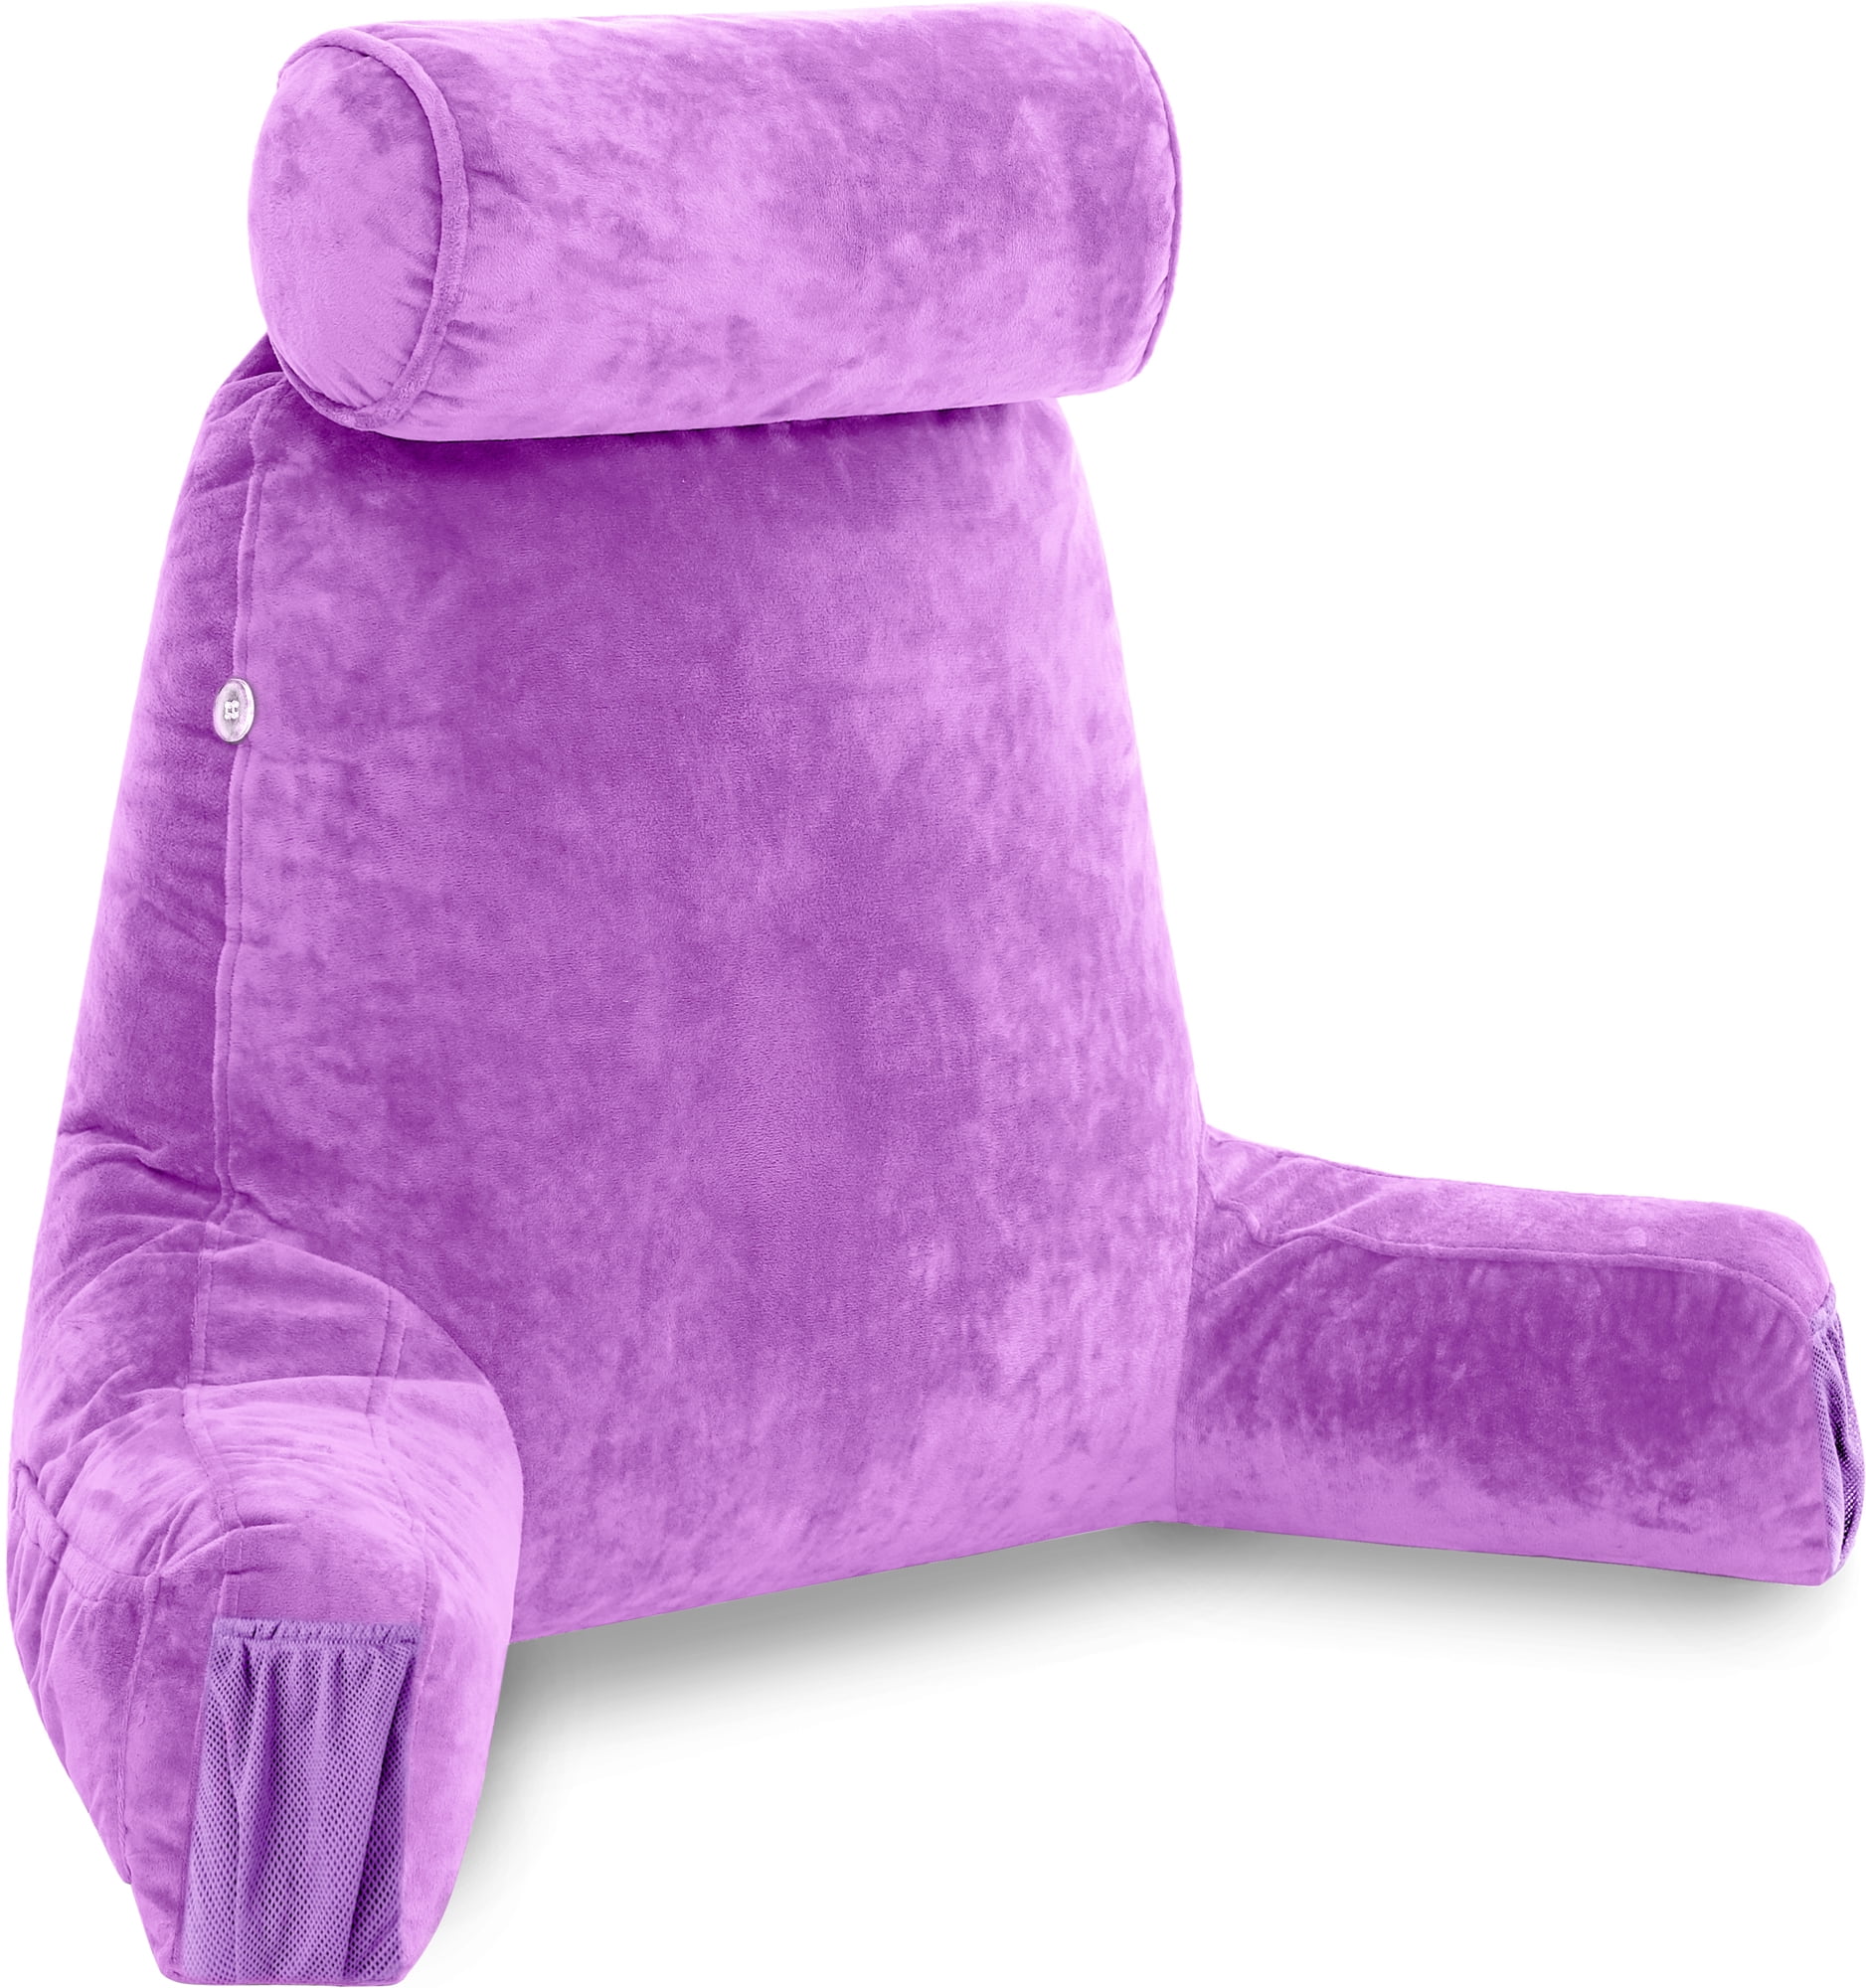 Husband Pillow Pink Bed Rest with Arms for Sitting Up 